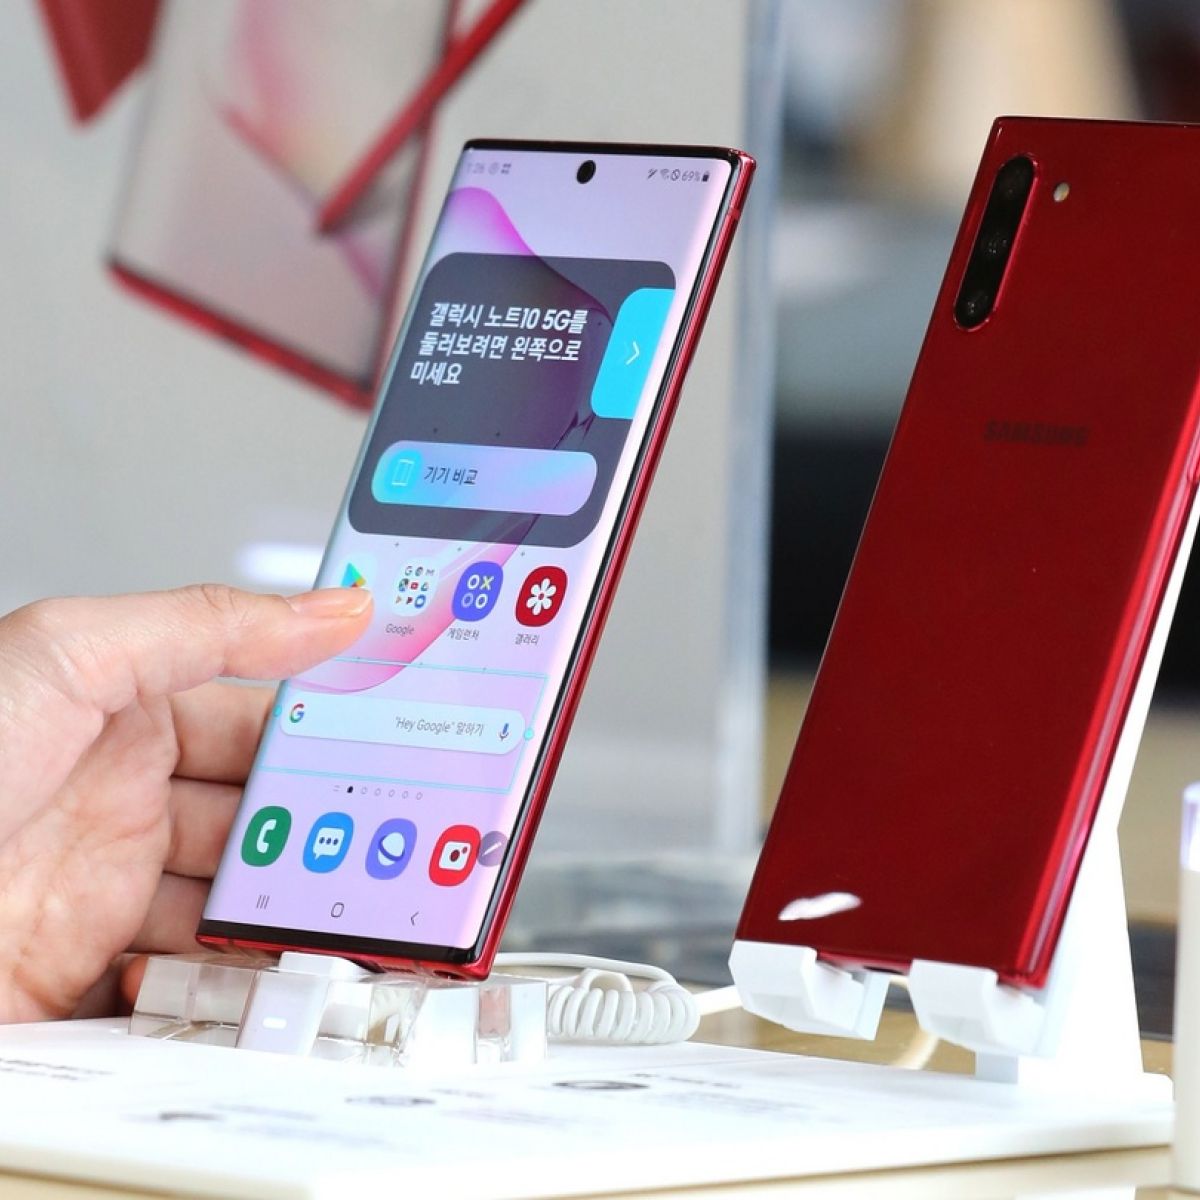 Samsung Galaxy Note 10+: If you like it 